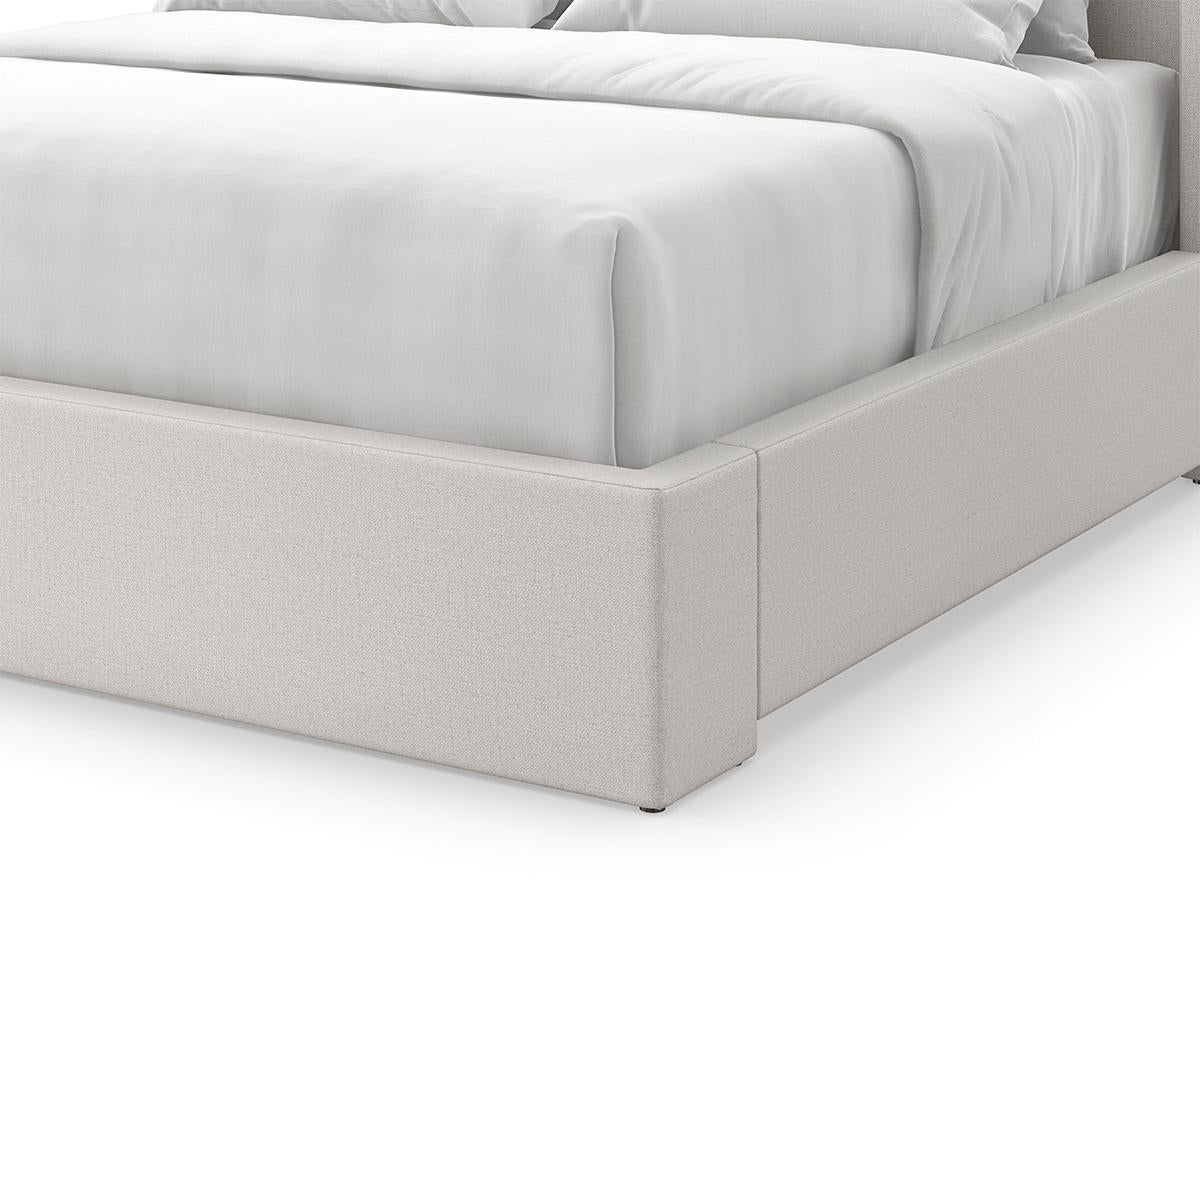 Flared Modern Fully Upholstered King Bed - Light In New Condition For Sale In Westwood, NJ